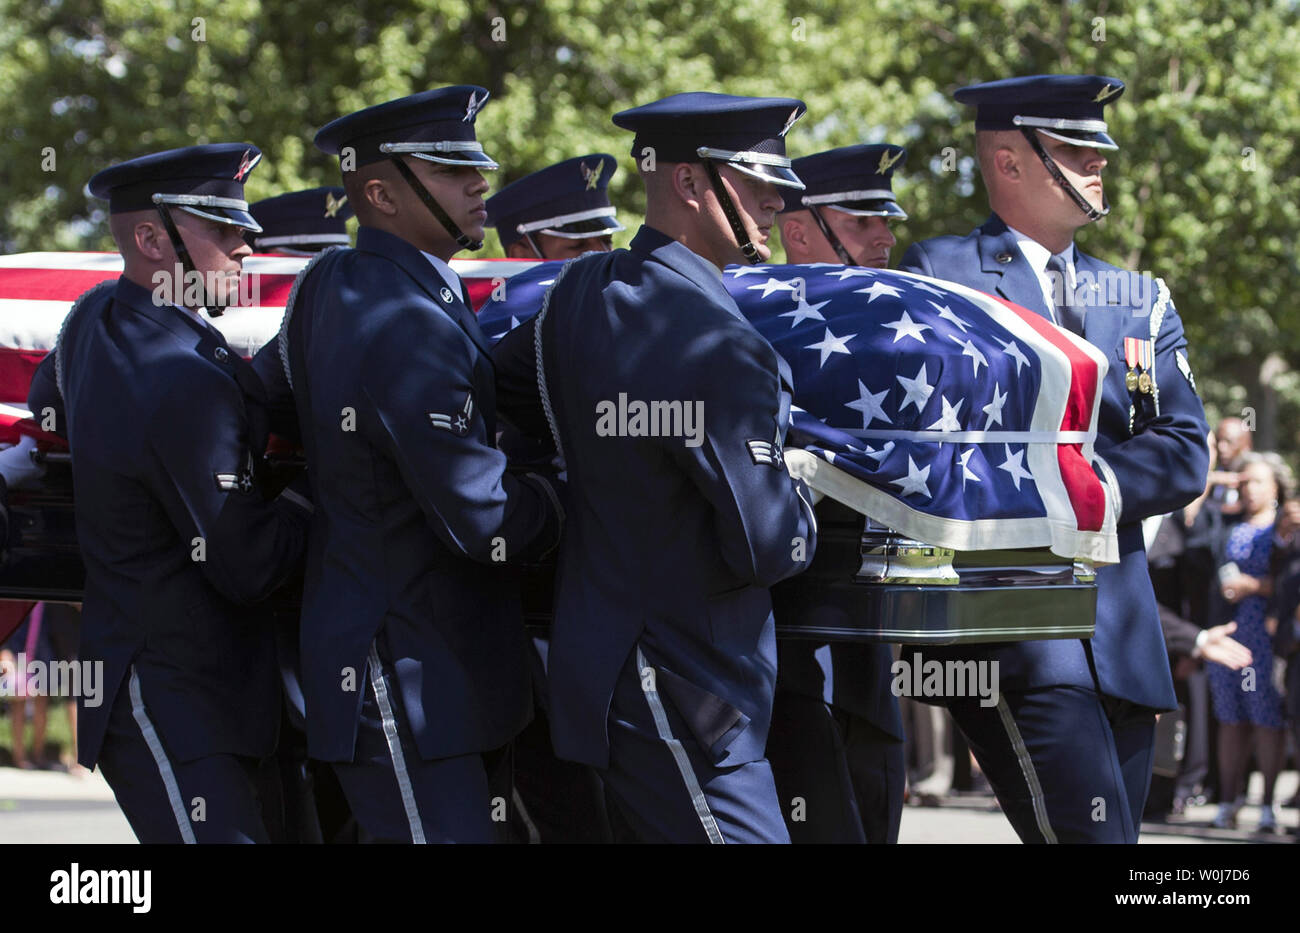 An Air Force Honor Guard casket team carries the casket containing the remains of U.S. Air Force 2nd Lt., Malvin Greston 'Mal' Whitfield during his funeral at Arlington National Cemetery in Arlington, Virginia on June 8, 2016. Whitfield served in the U.S. Army Air Forces in 1943 as a member of the Tuskegee Airmen and was also a five-time Olympic medalist, including three gold. Photo by Kevin Dietsch/UPI Stock Photo